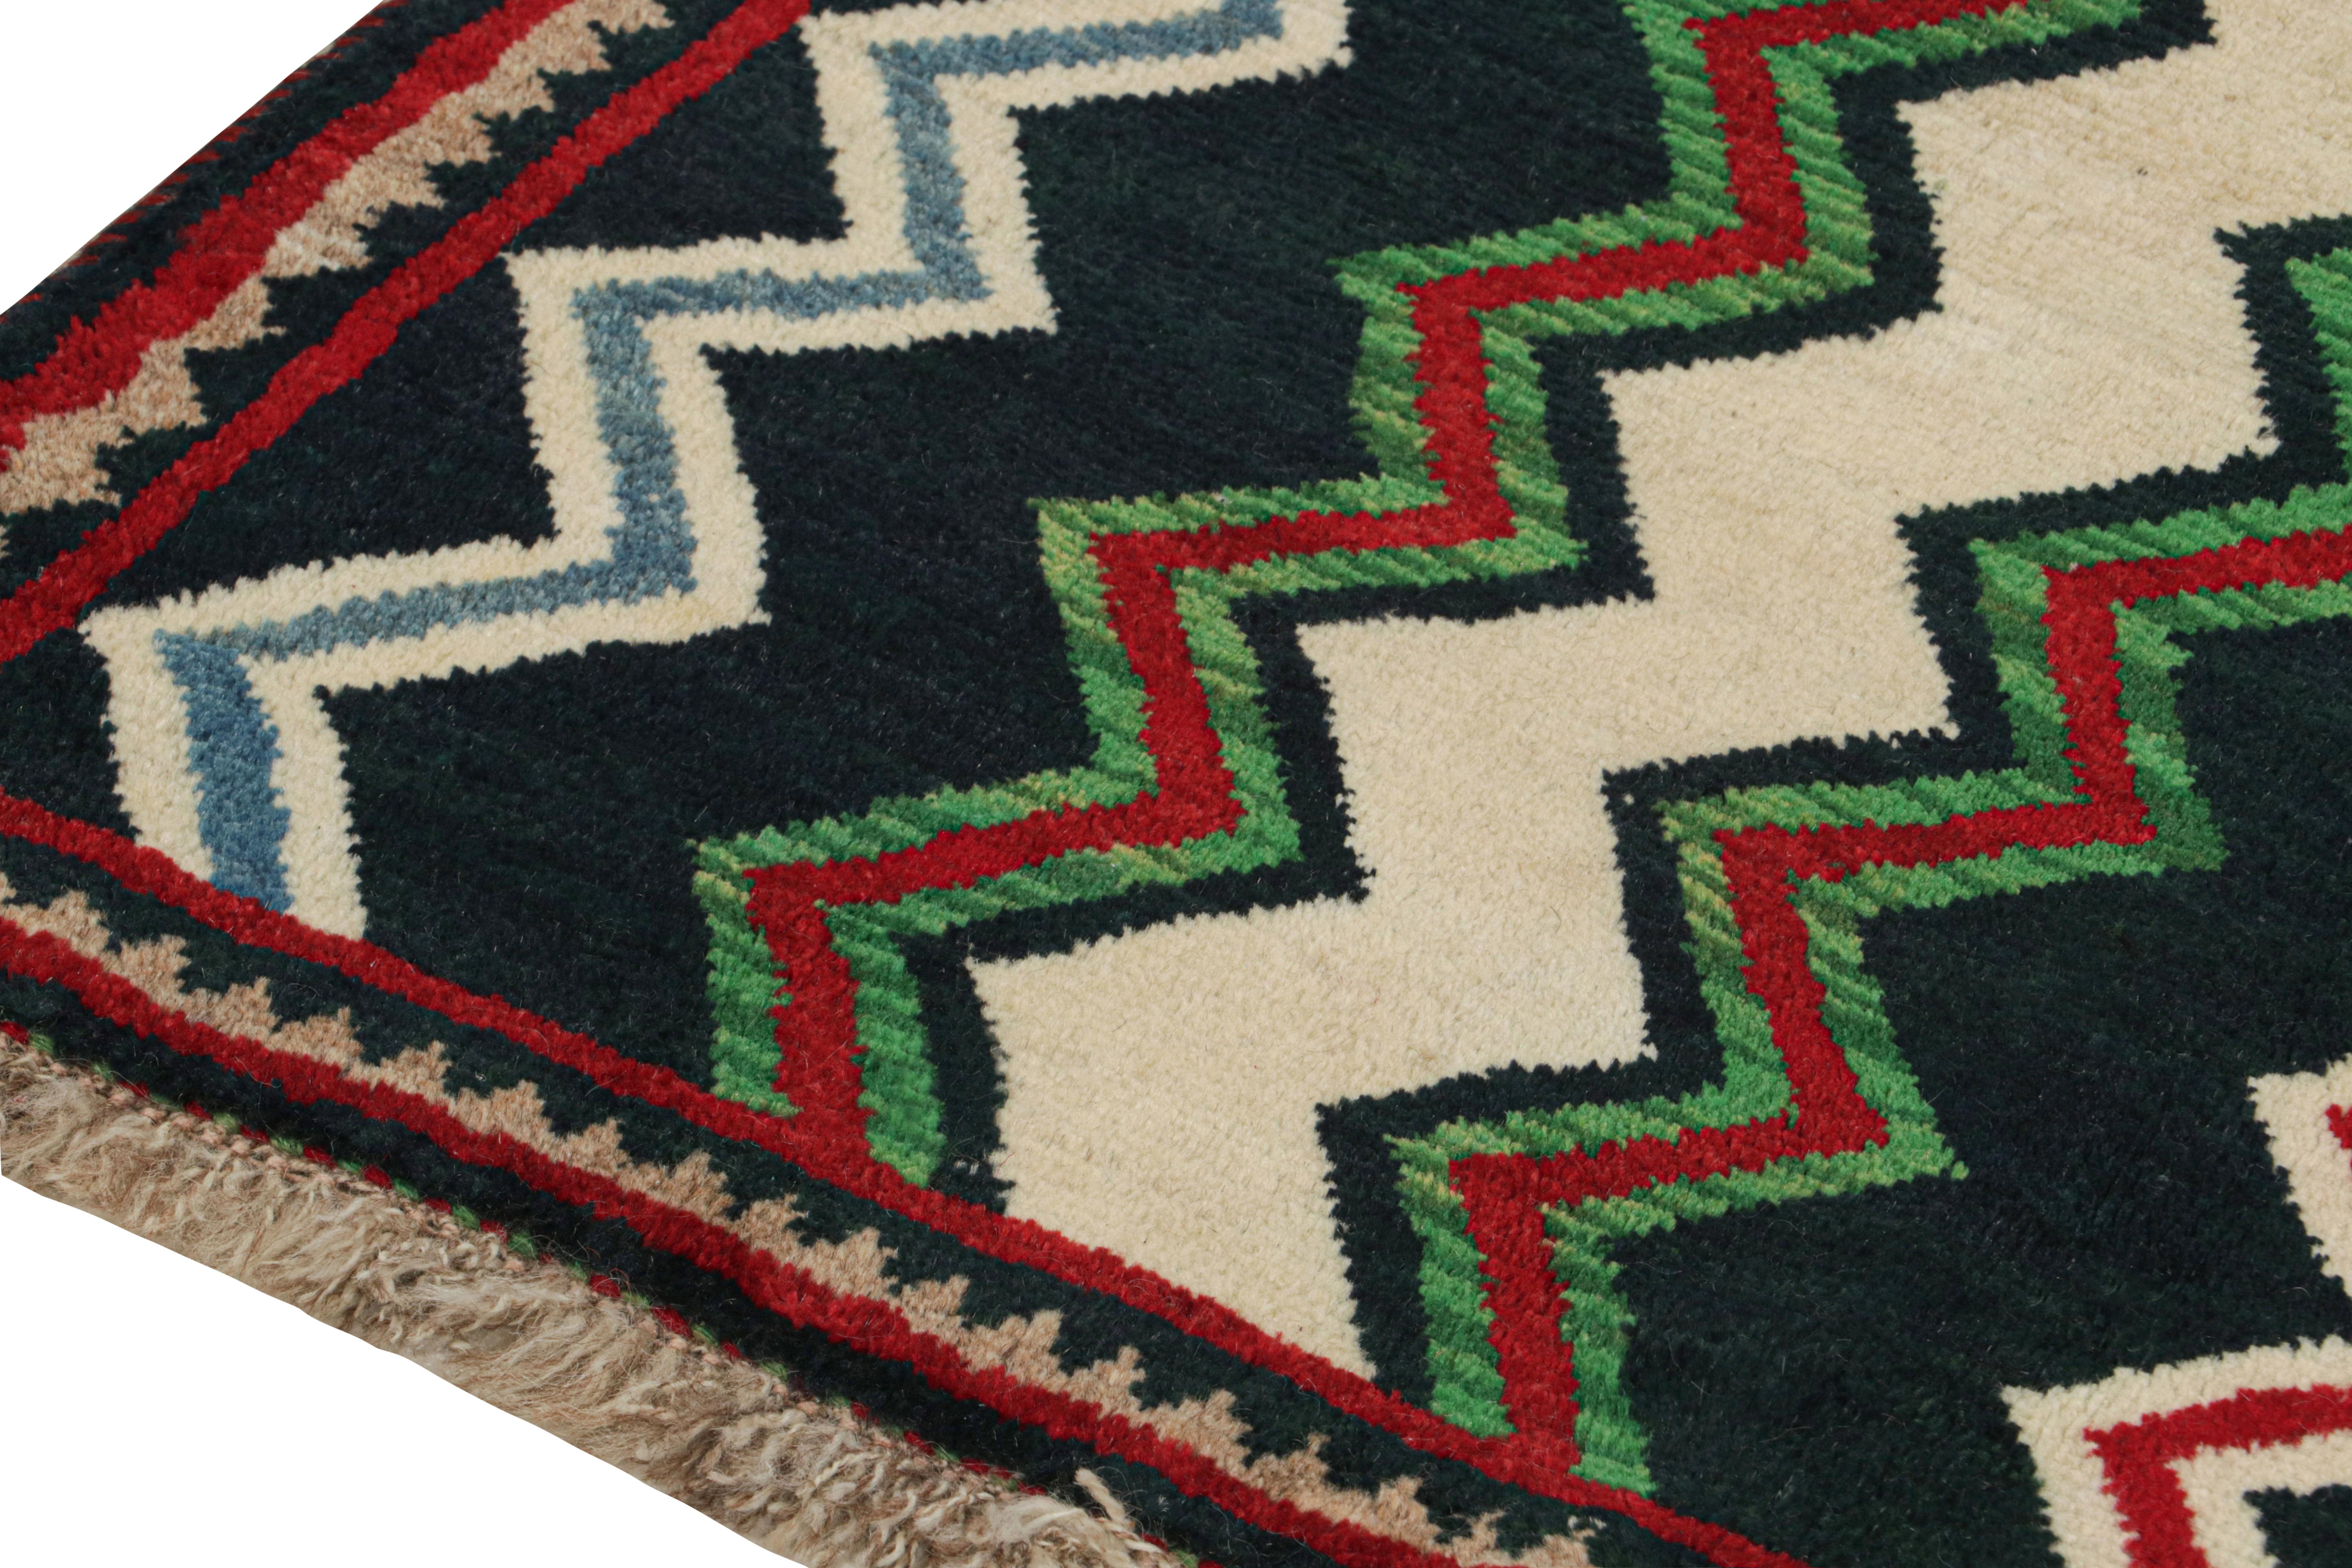 Vintage Qashqai Persian Gabbeh Runner with Chevron Patterns by Rug & Kilim In Good Condition For Sale In Long Island City, NY